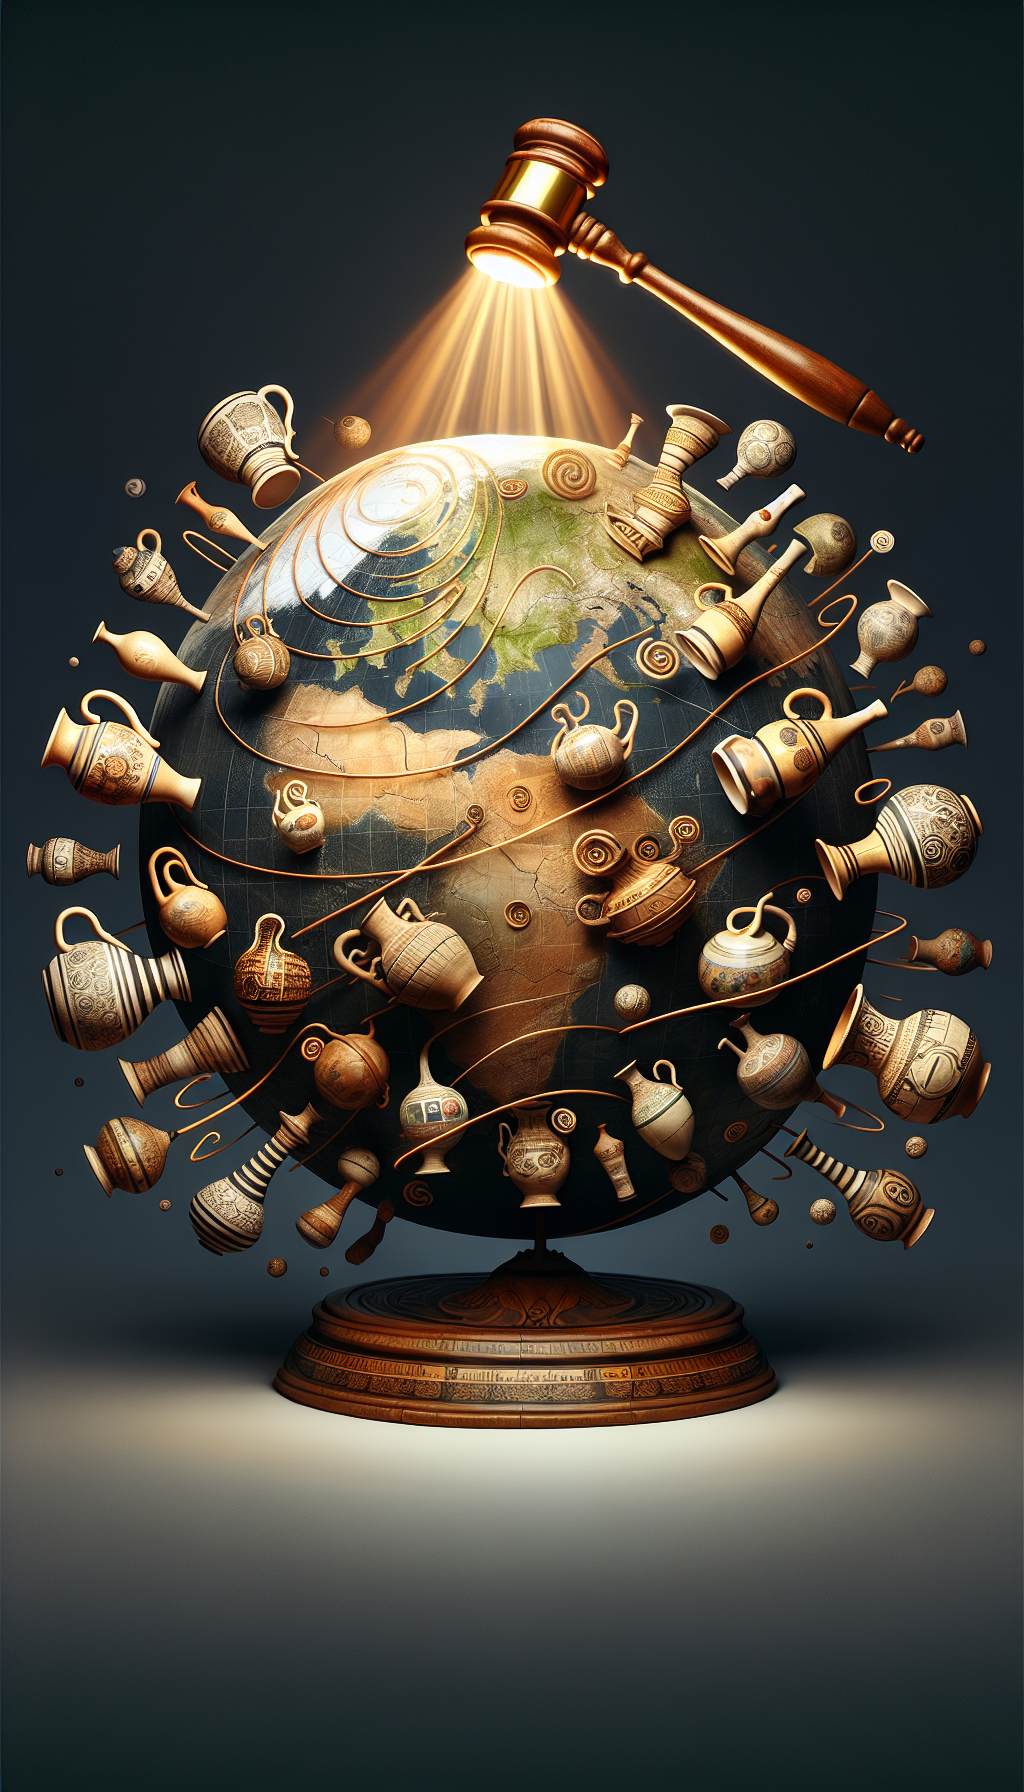 A whimsical globe spins, dotted with antique stoneware jugs that morph in style across regions, their cracks filled with gold, denoting age as a value indicator. Time spirals out from each jug, with some jugs bearing thick vines representing historical periods. An ornate auction gavel hovers, casting values like sun rays over the map, highlighting the jug's origins.